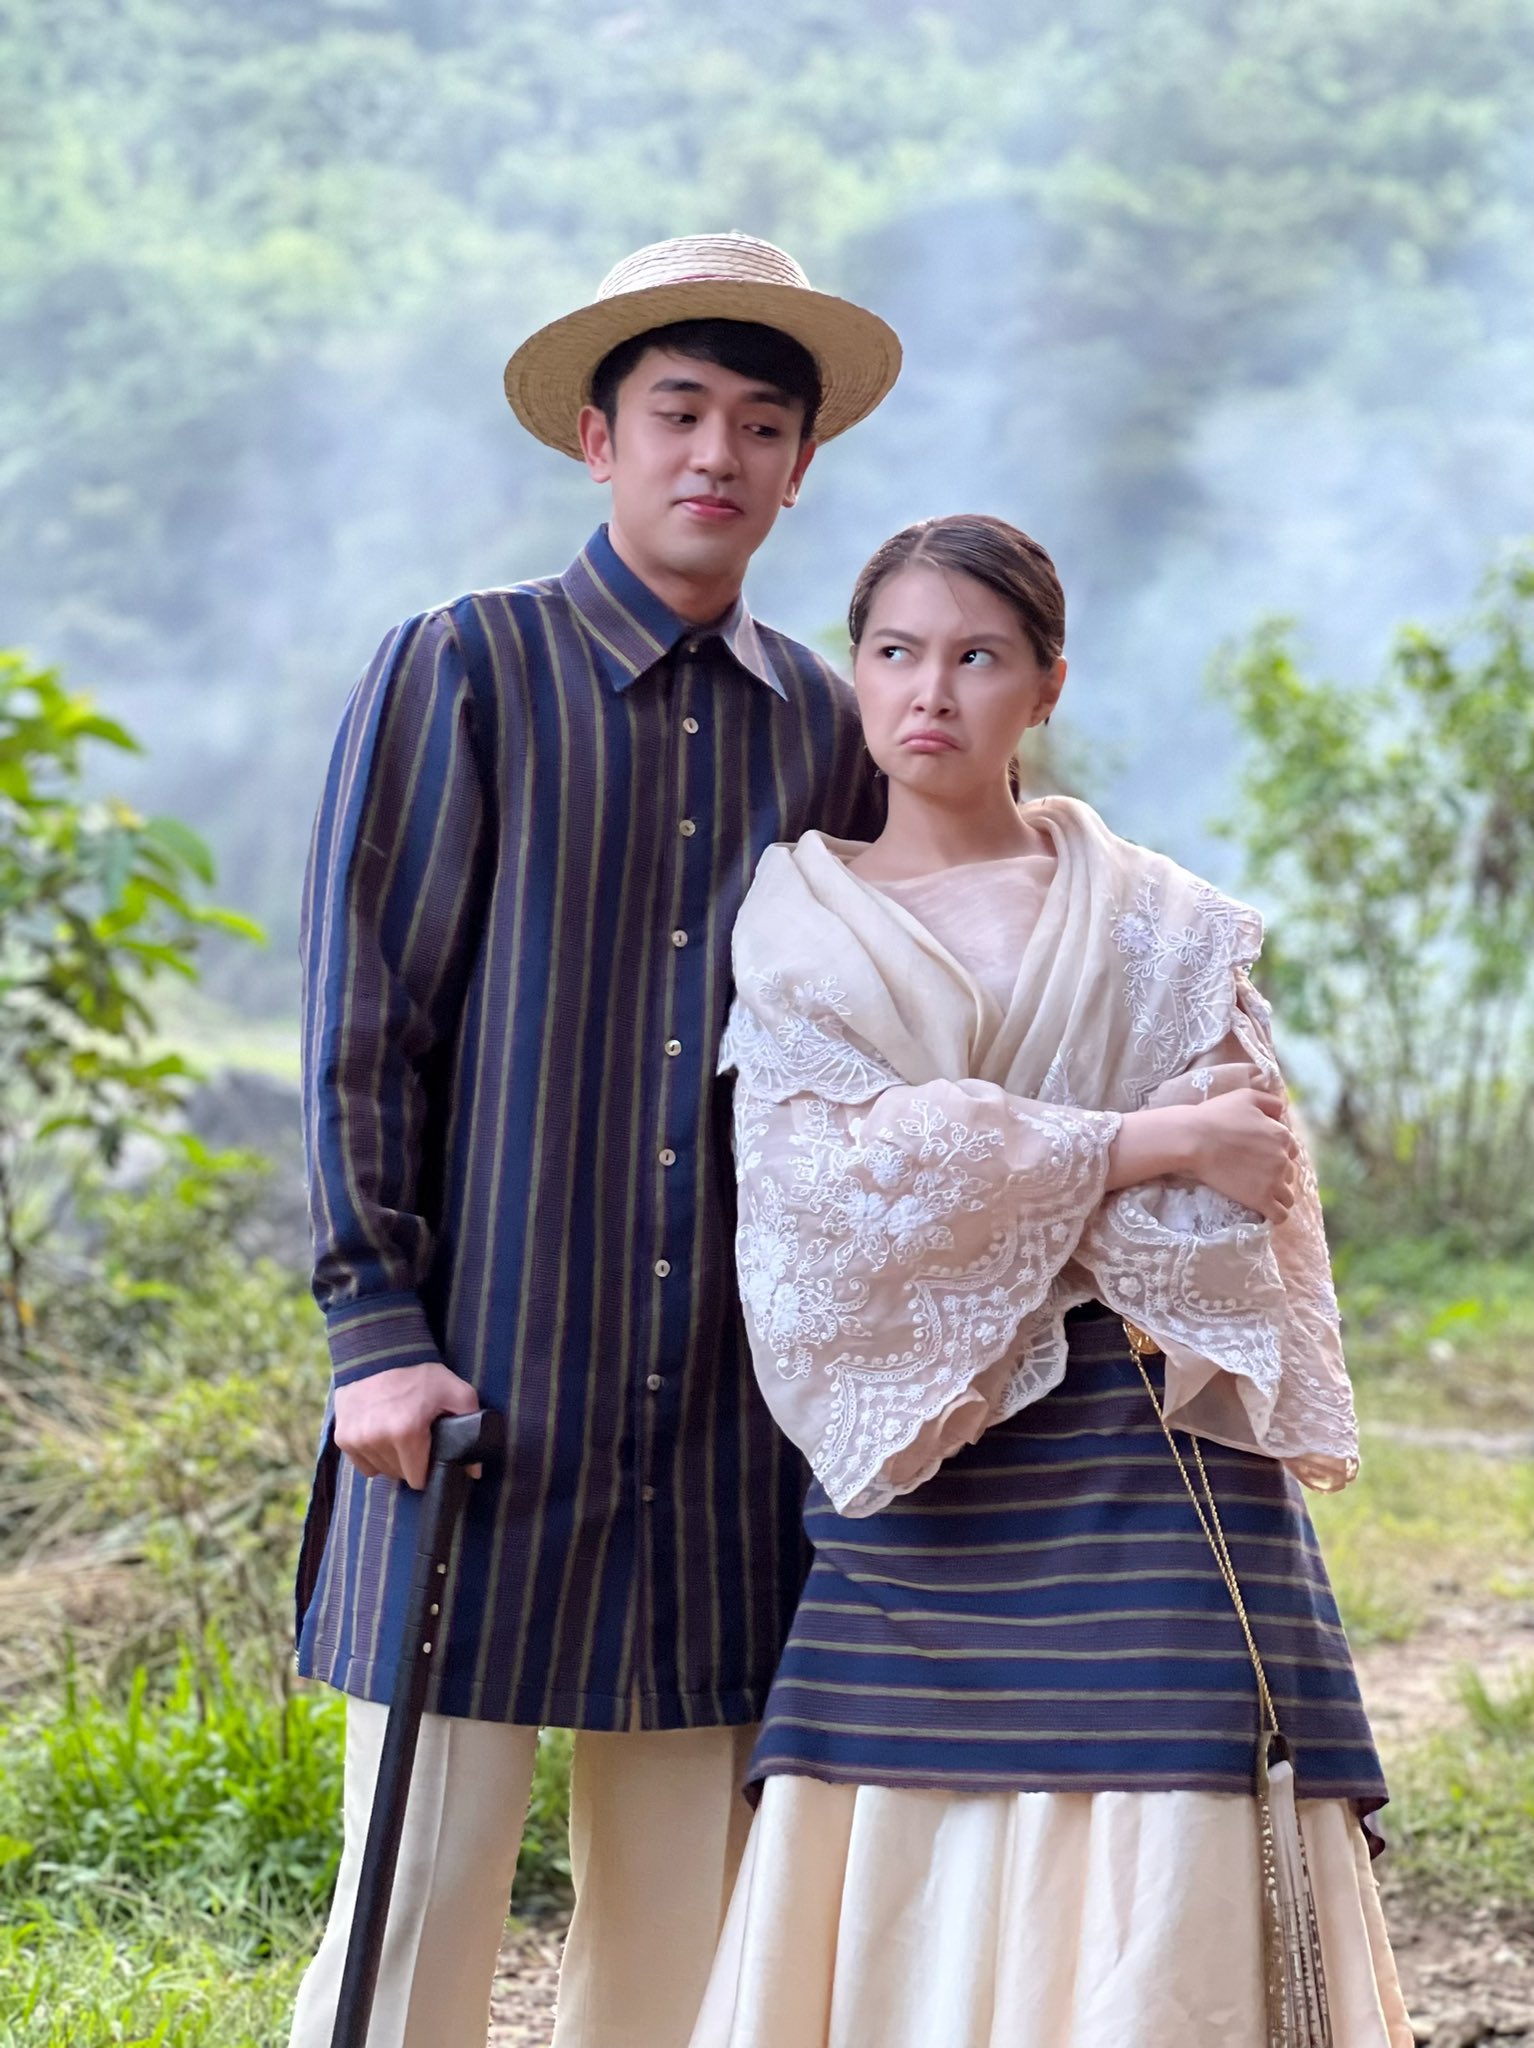 David Licauco and Barbie Forteza as Fidel and Klay of the FiLay tandem